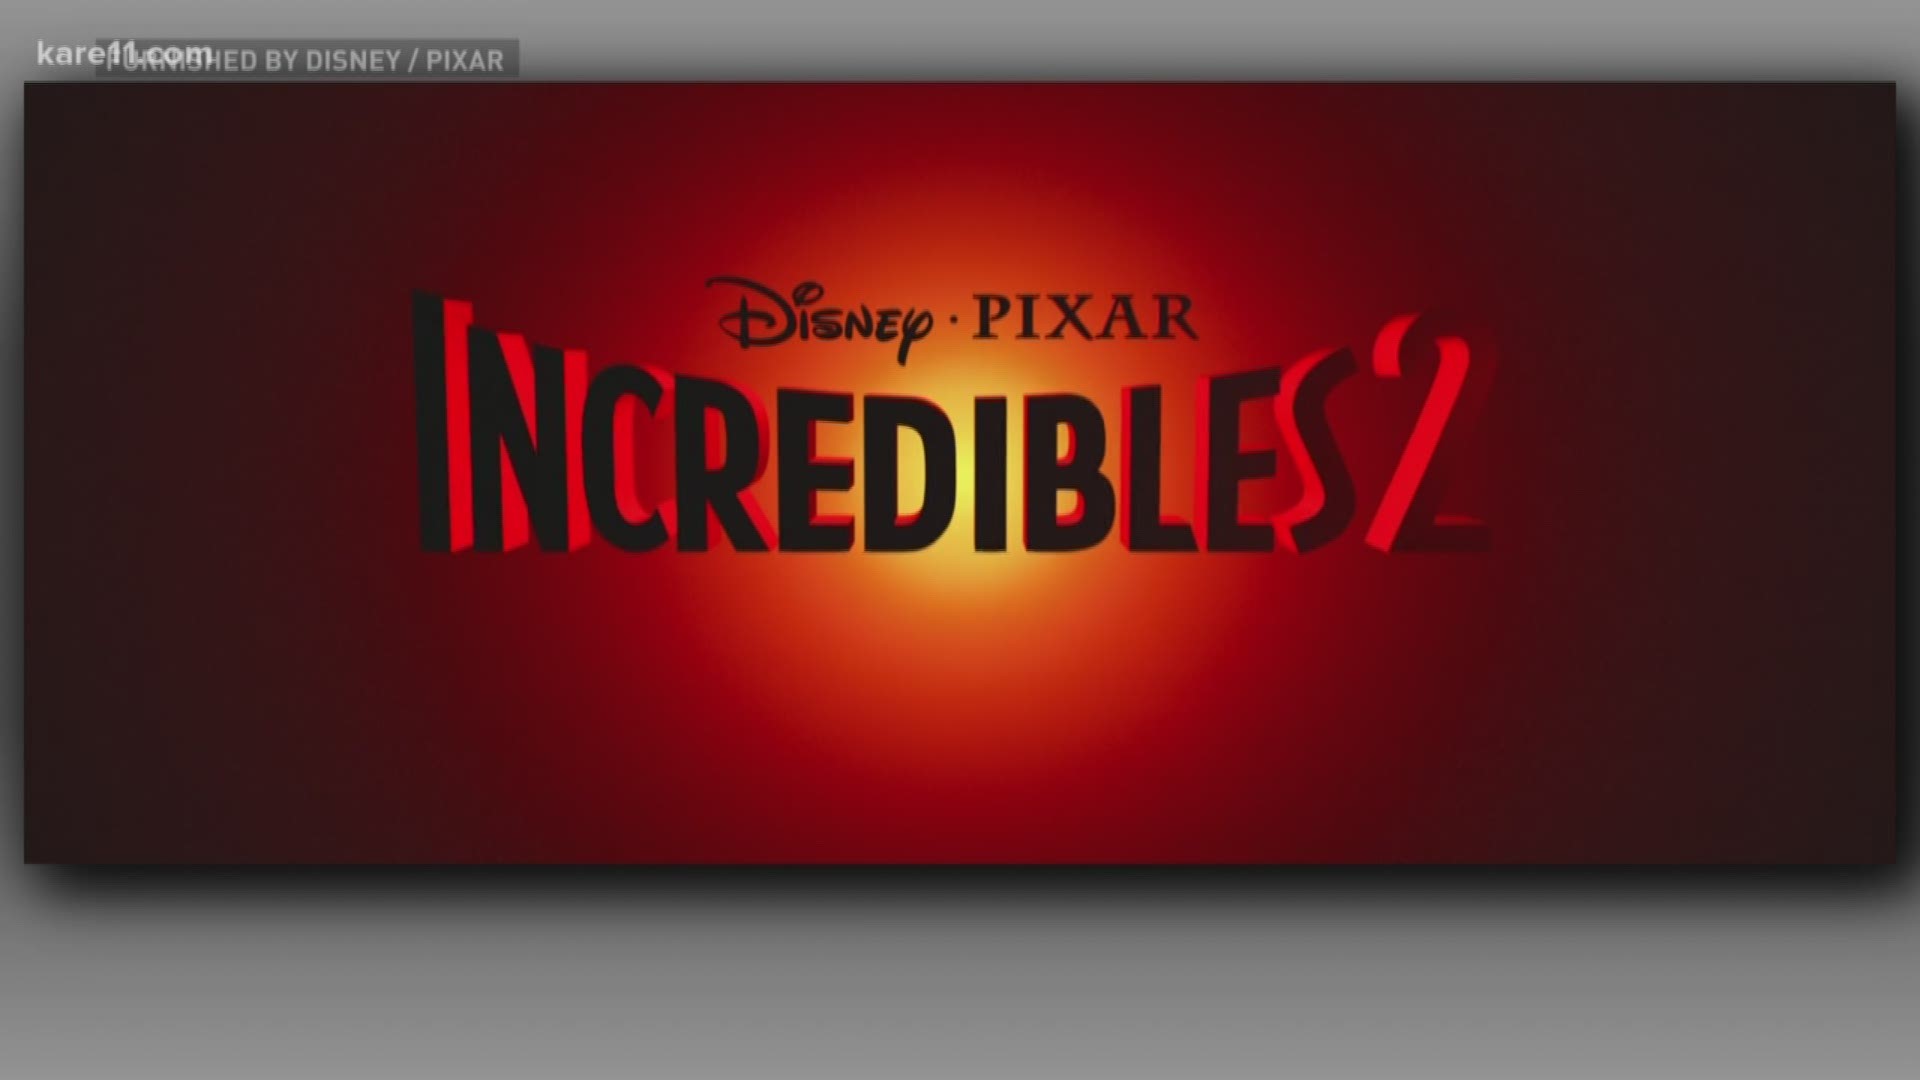 It's been 14 years since the last 'Incredibles' film ... but Tim Lammers says the wait is well worth it. https://kare11.tv/2HOmT3z